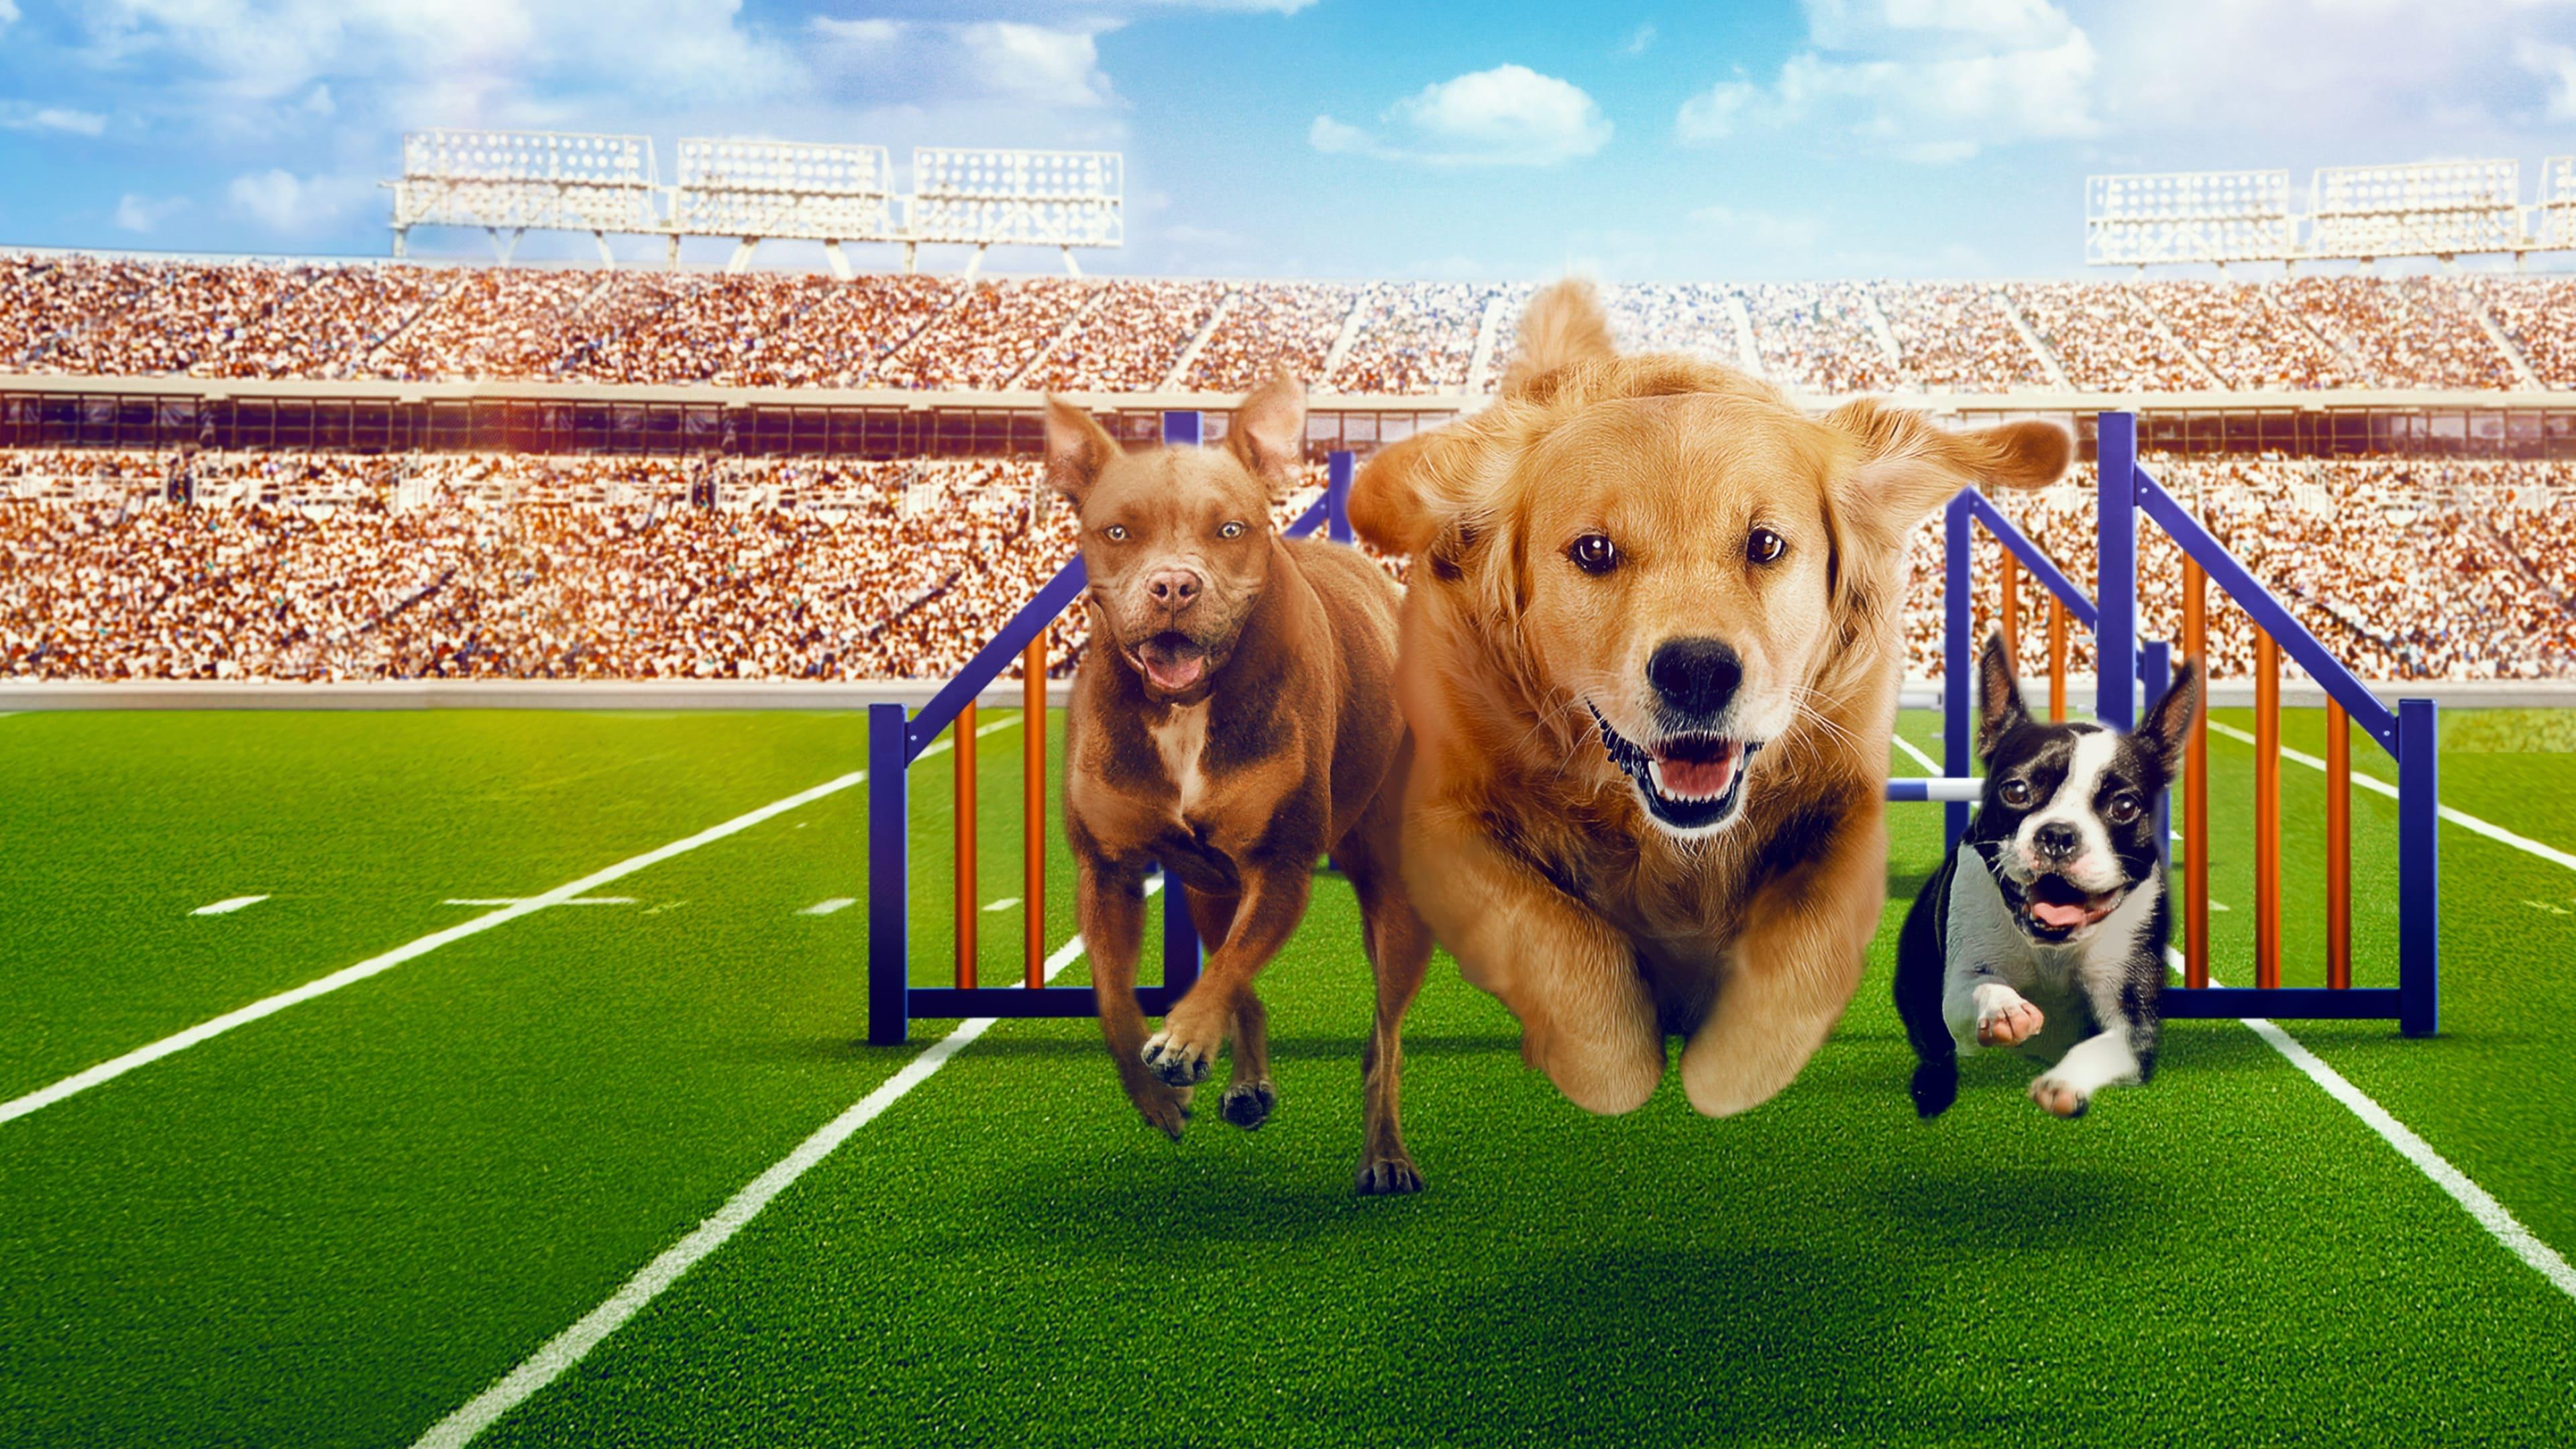 Puppy Bowl Presents: The Dog Games backdrop